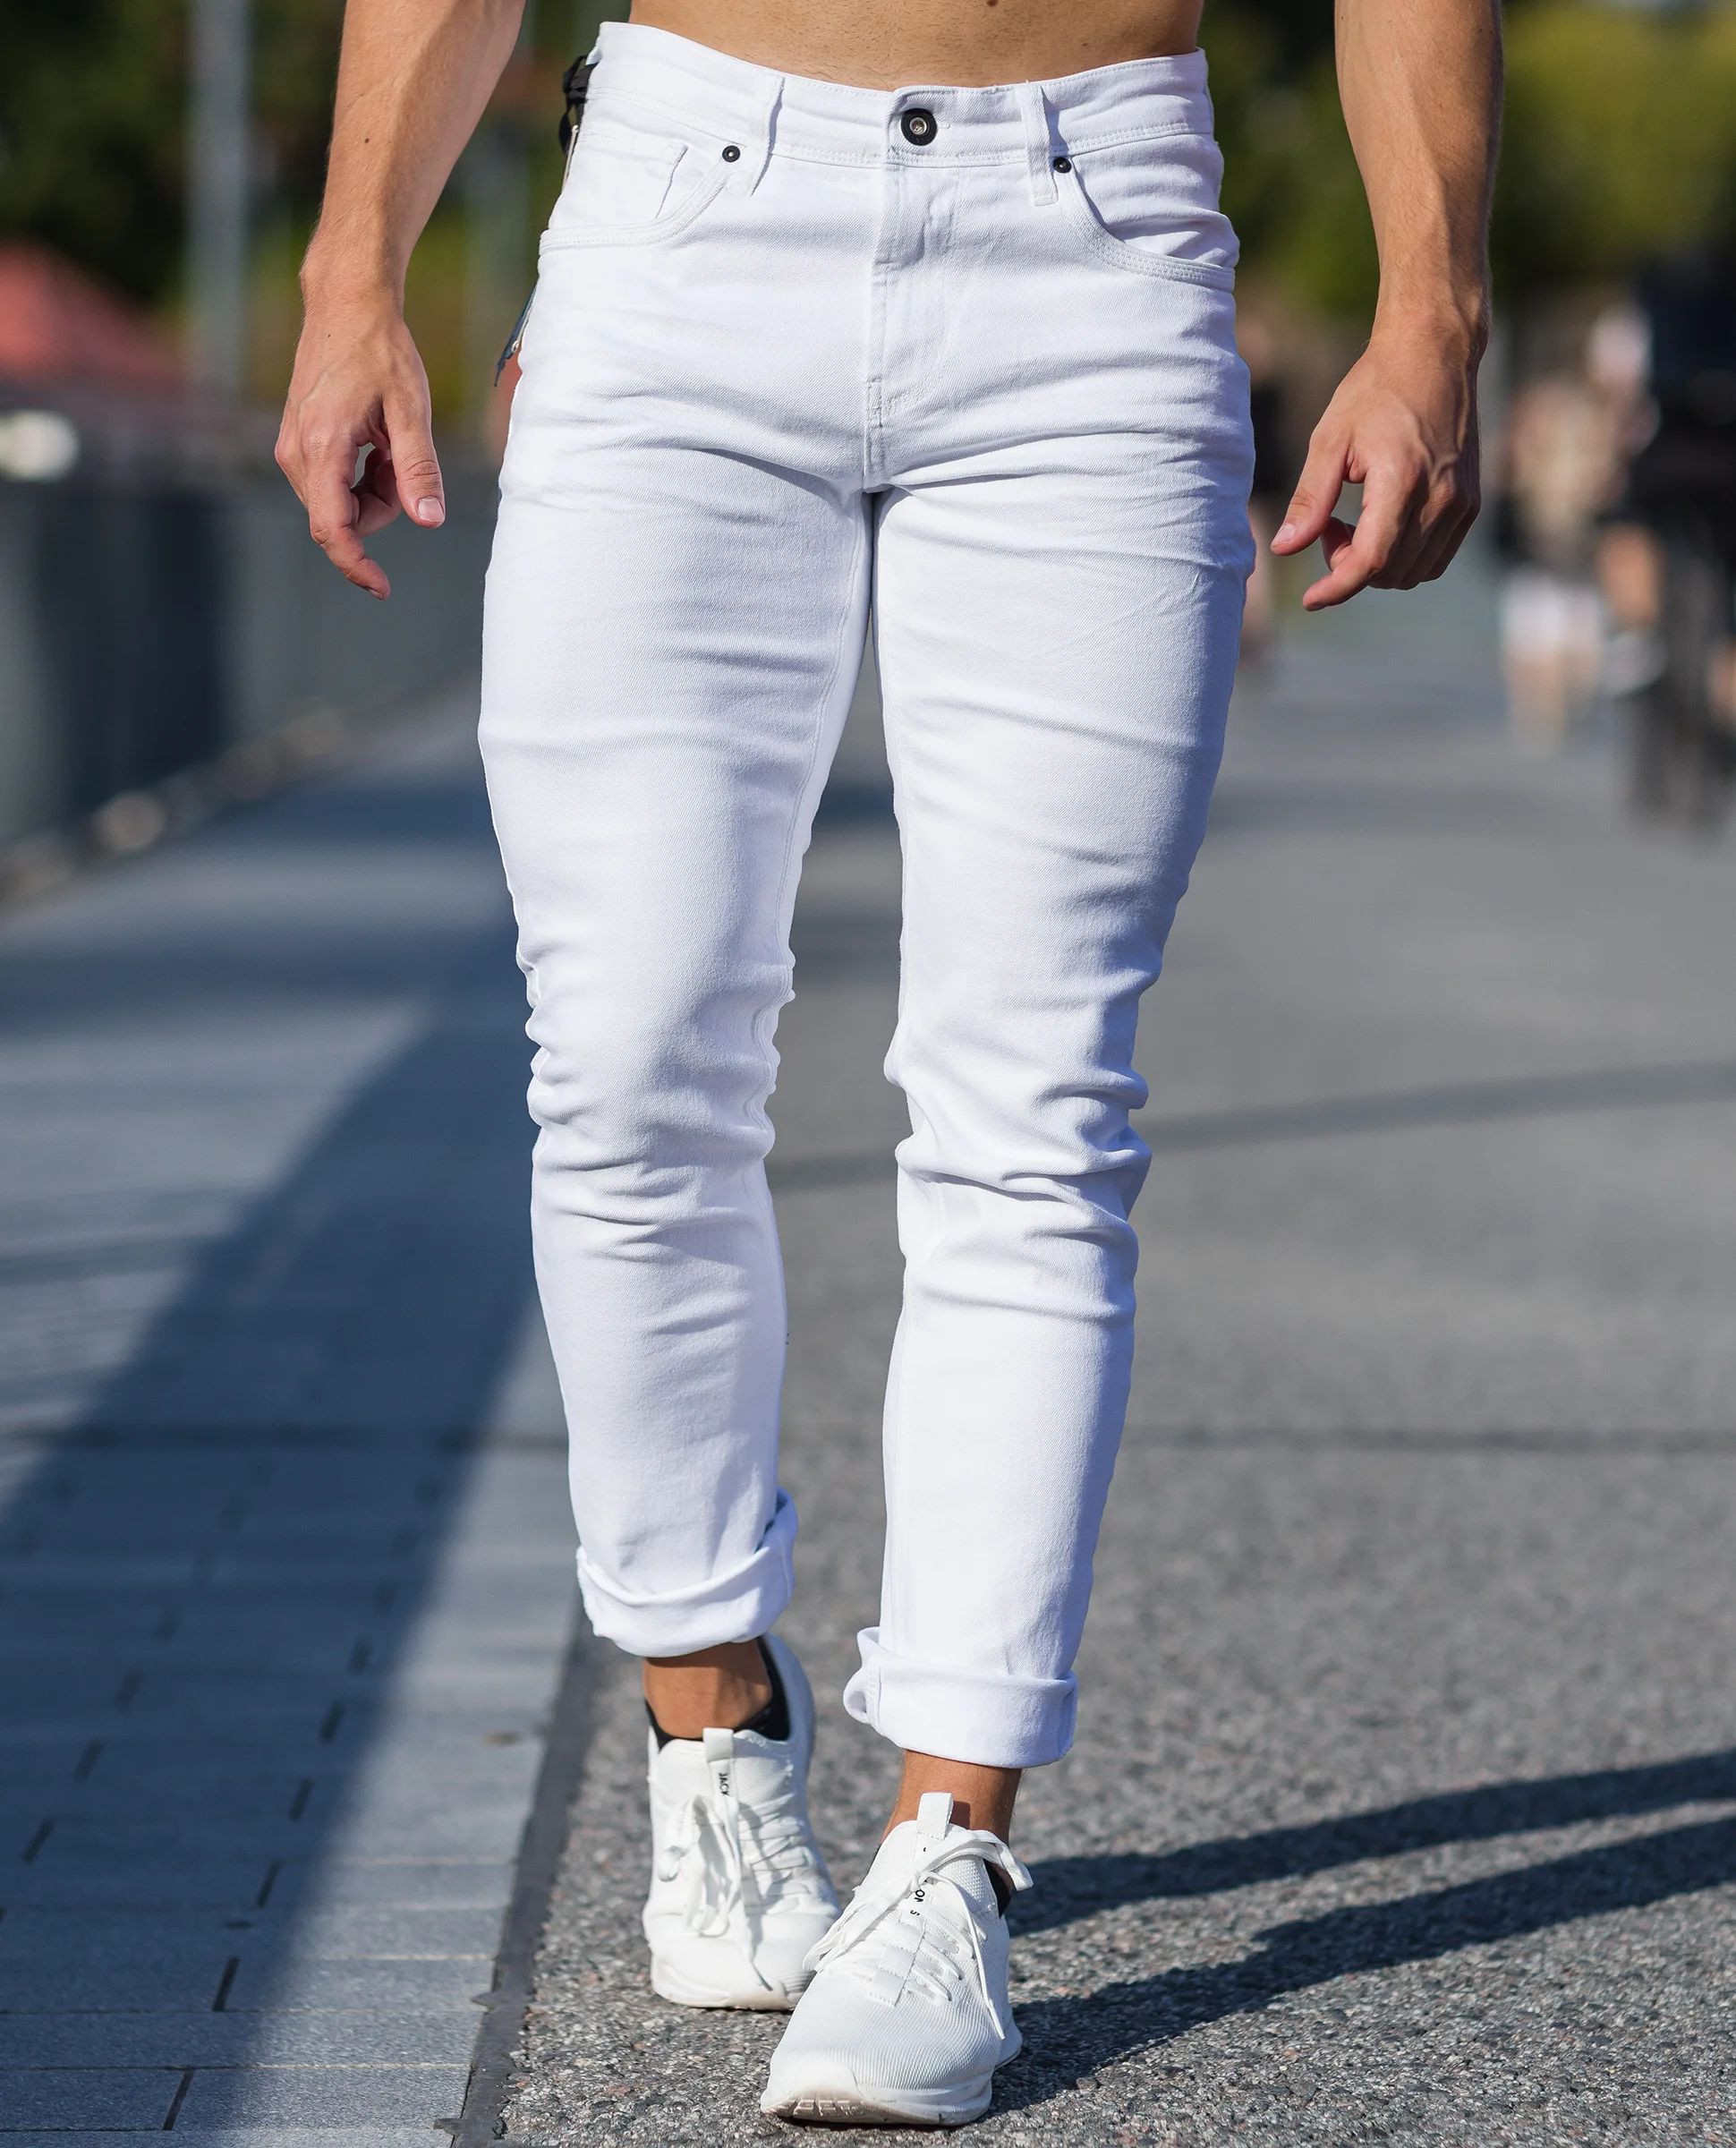 White Jeans Slim L32 Rusty Neal - 2224 - Jeans 